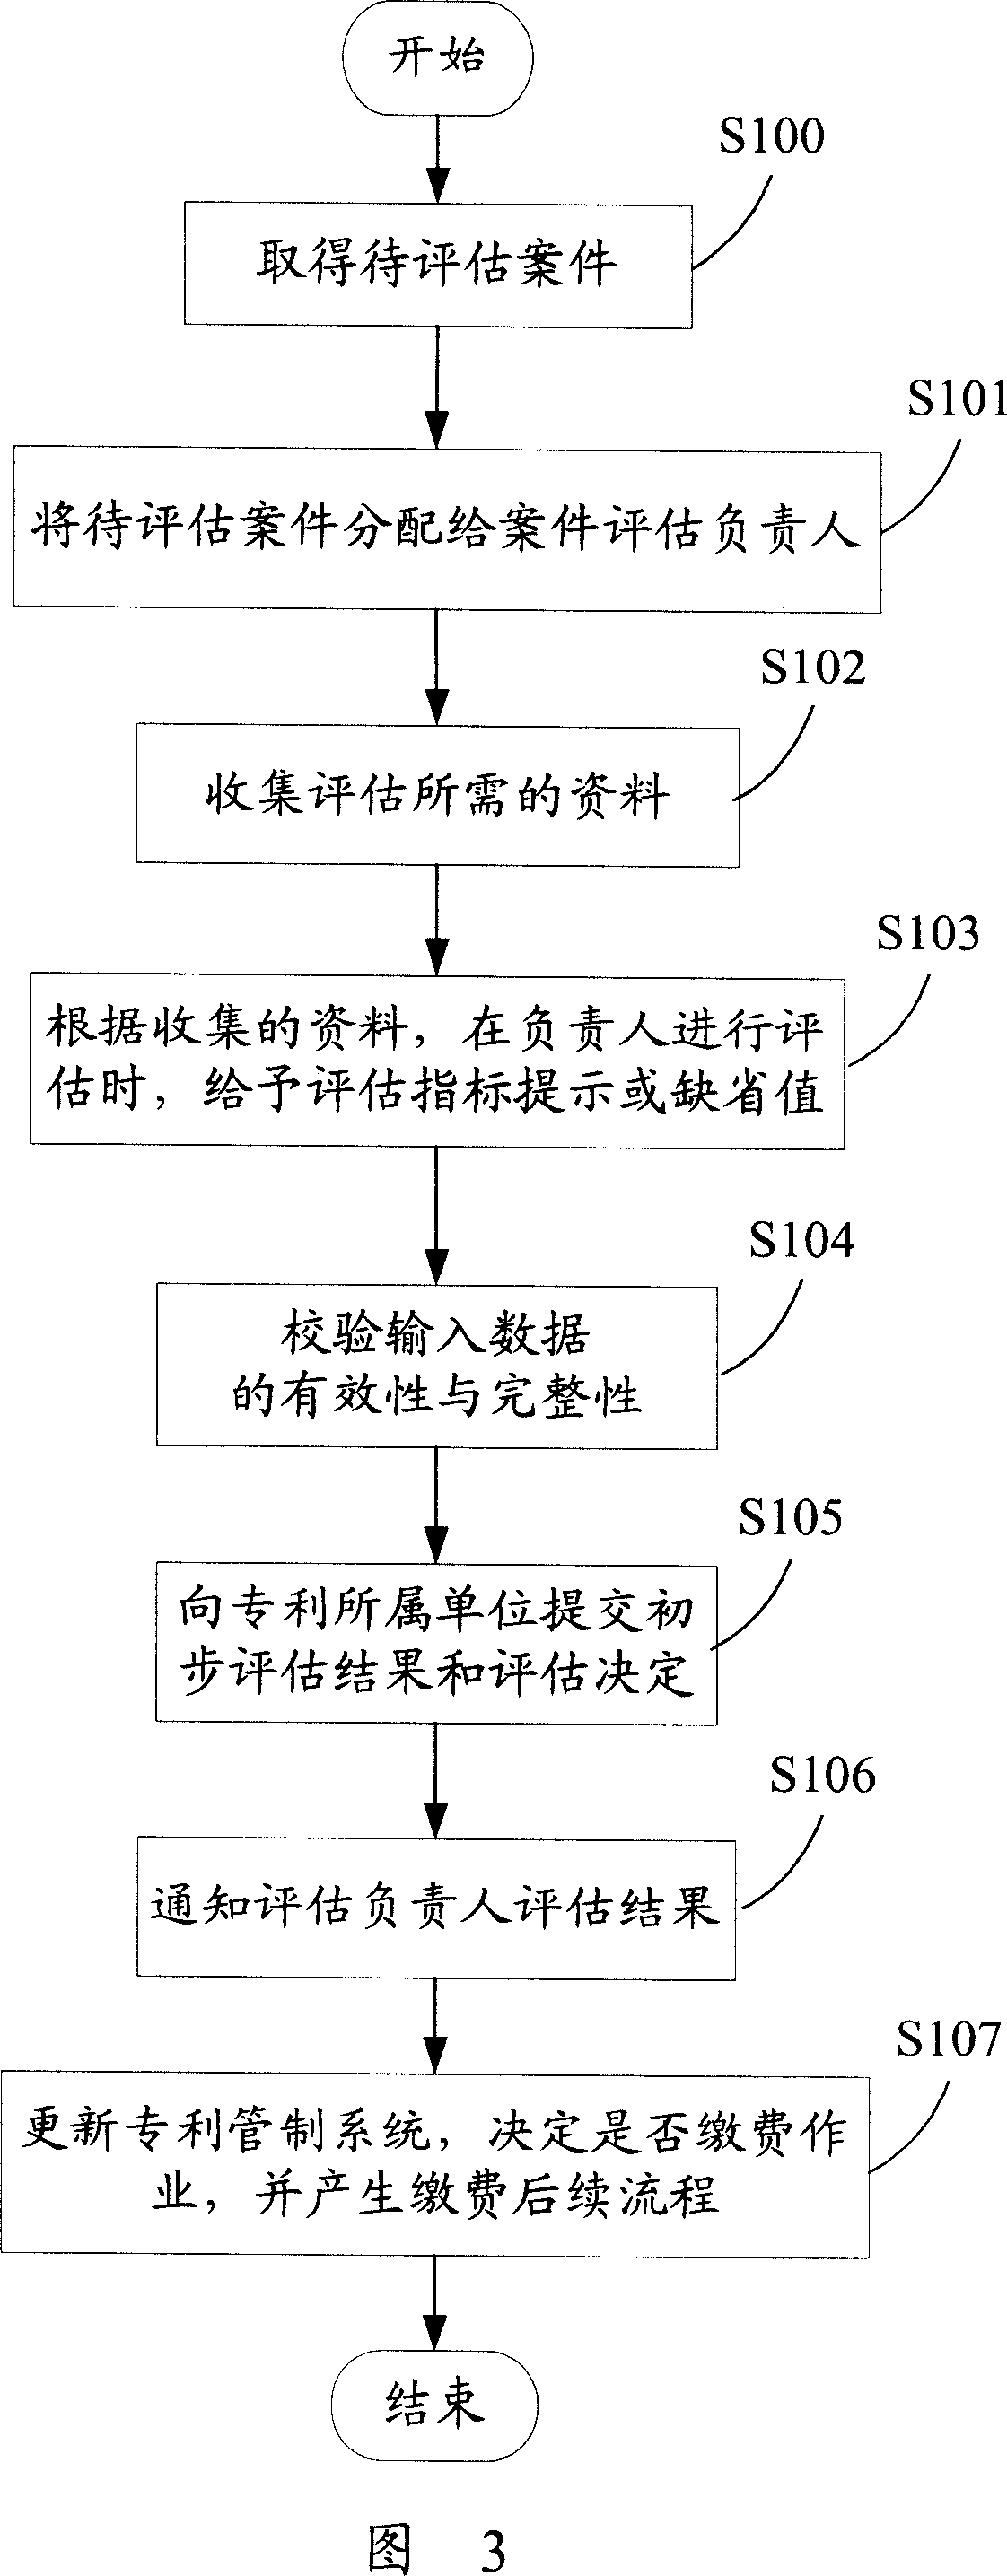 Patent valve estimating system and method